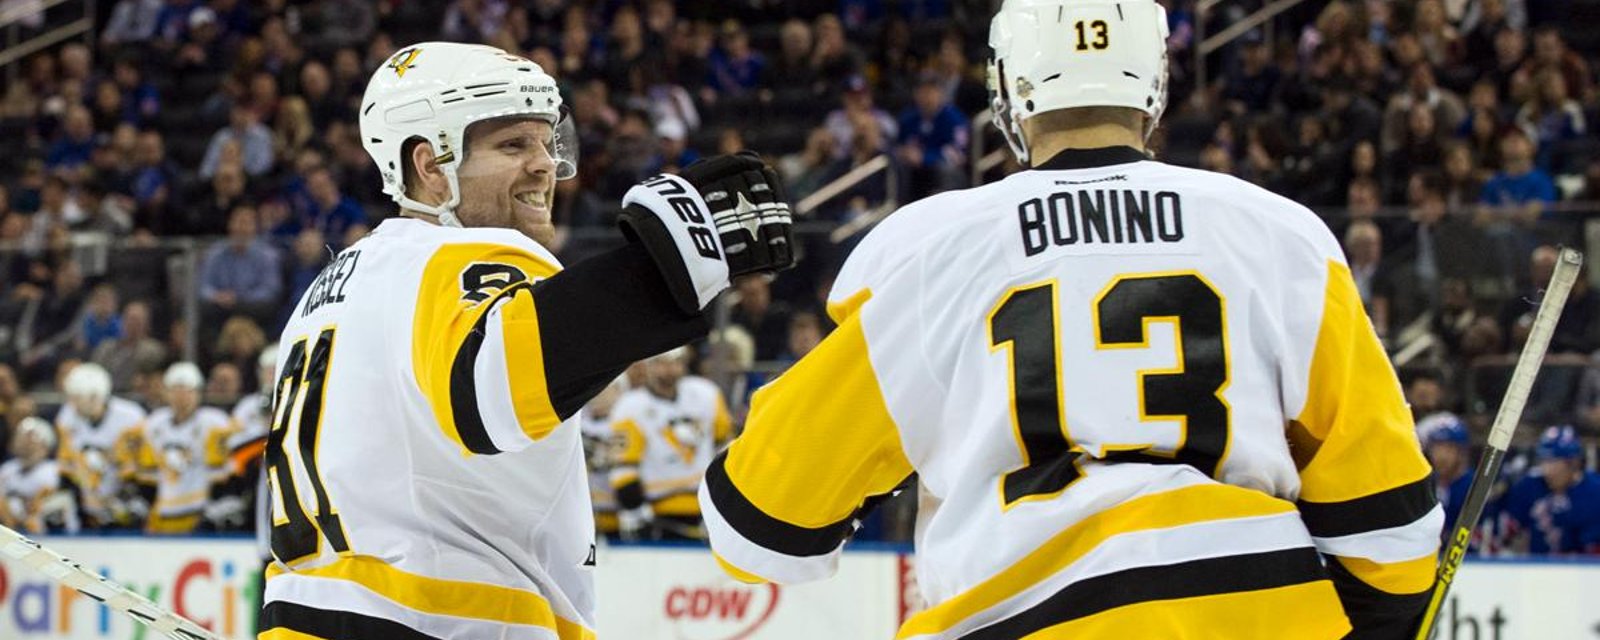 Kessel saves Bonino out of embarrassing situation! 